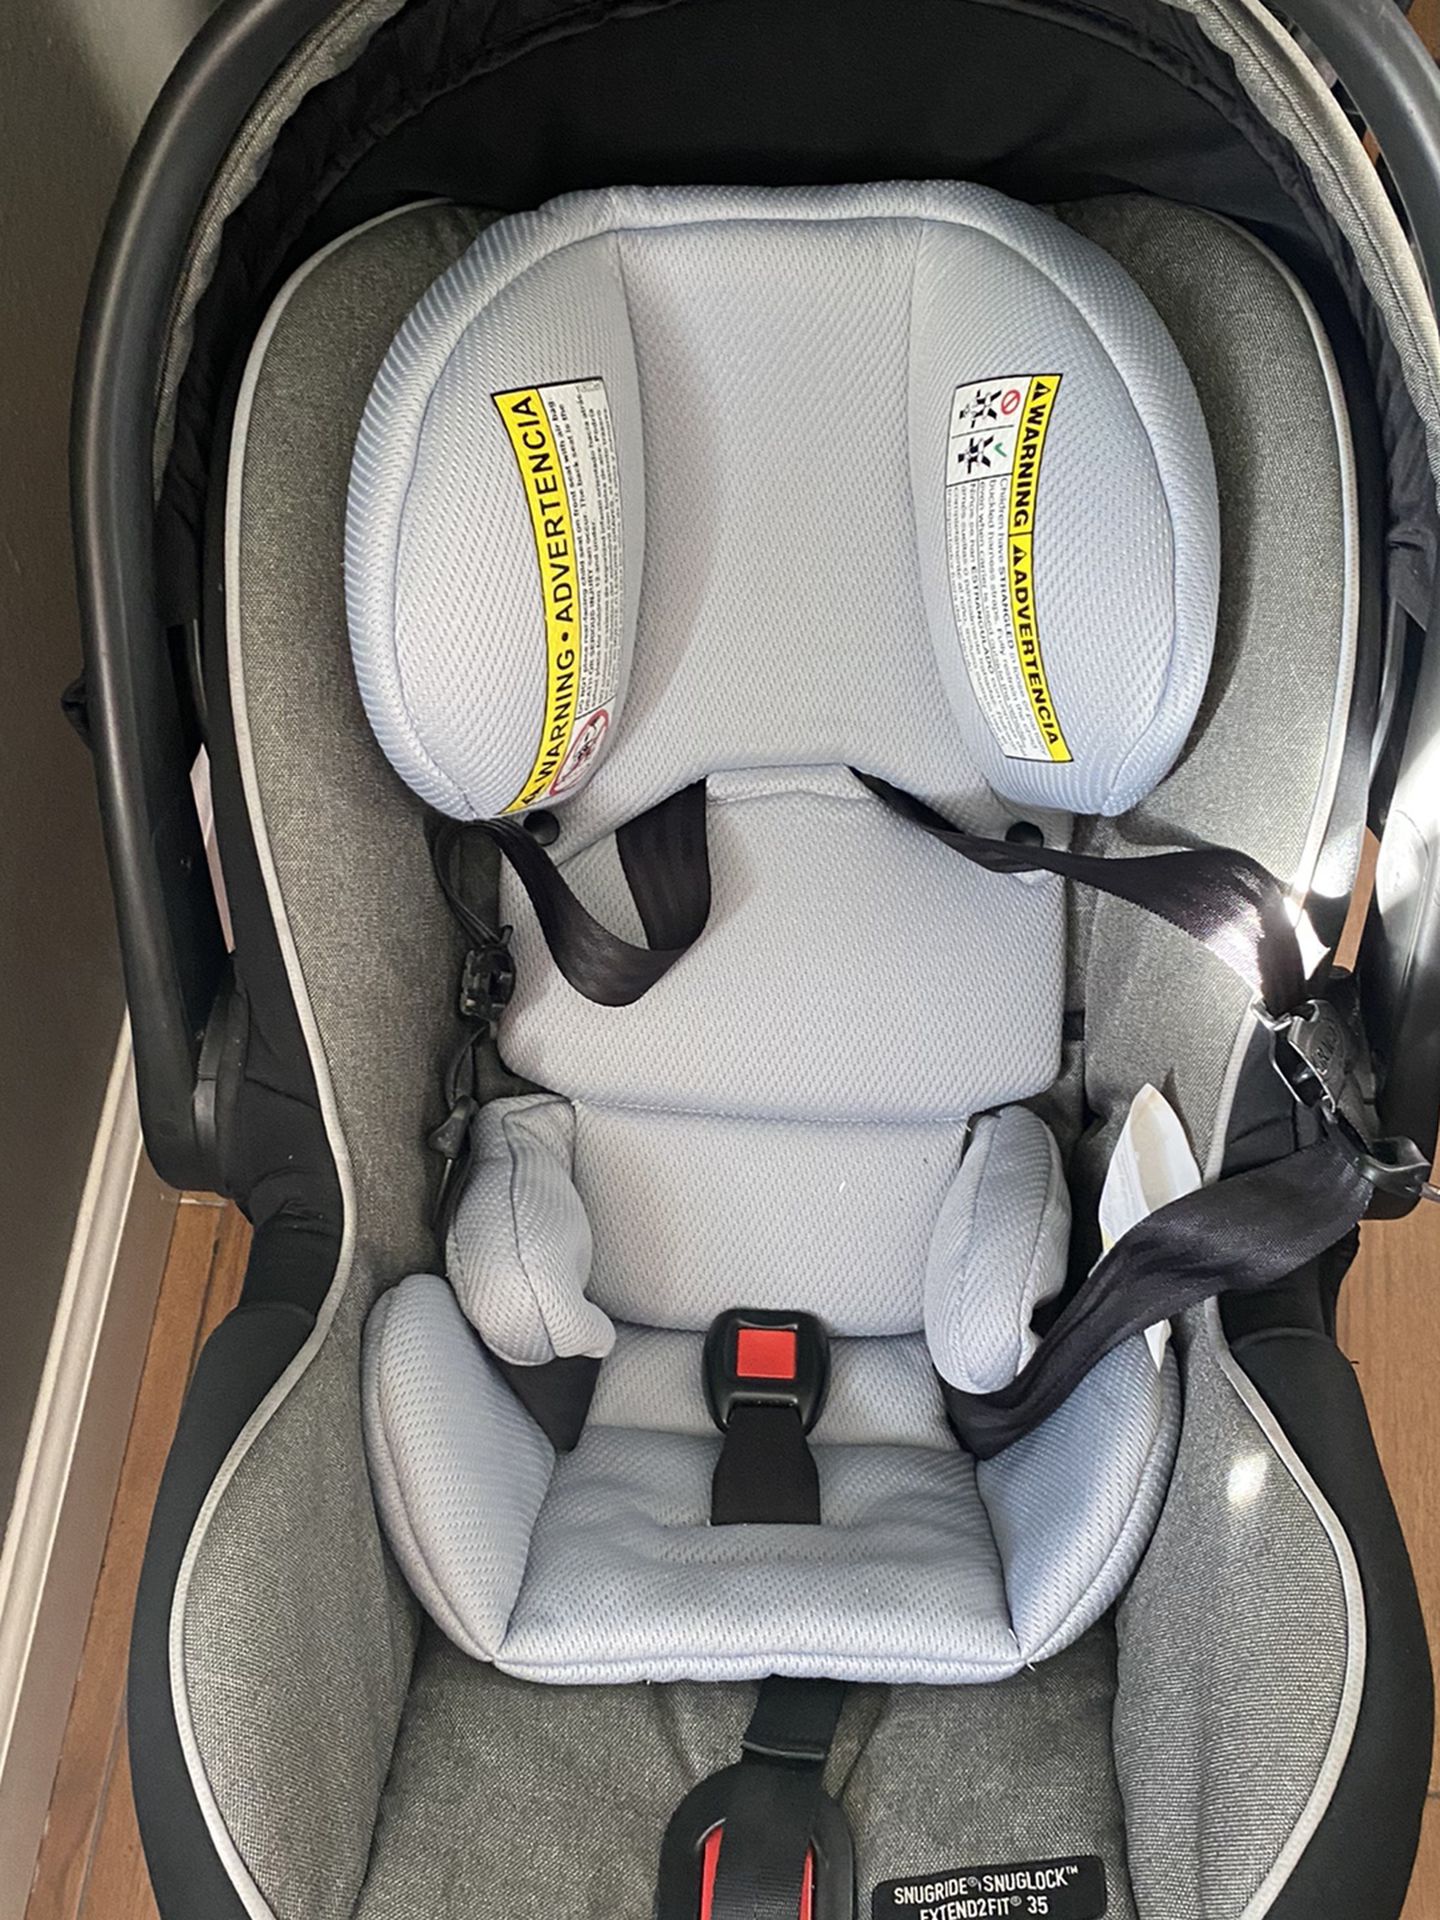 Graco Snugride Snug lock Extend2fit 35 Infant Car seat And 2 Bases